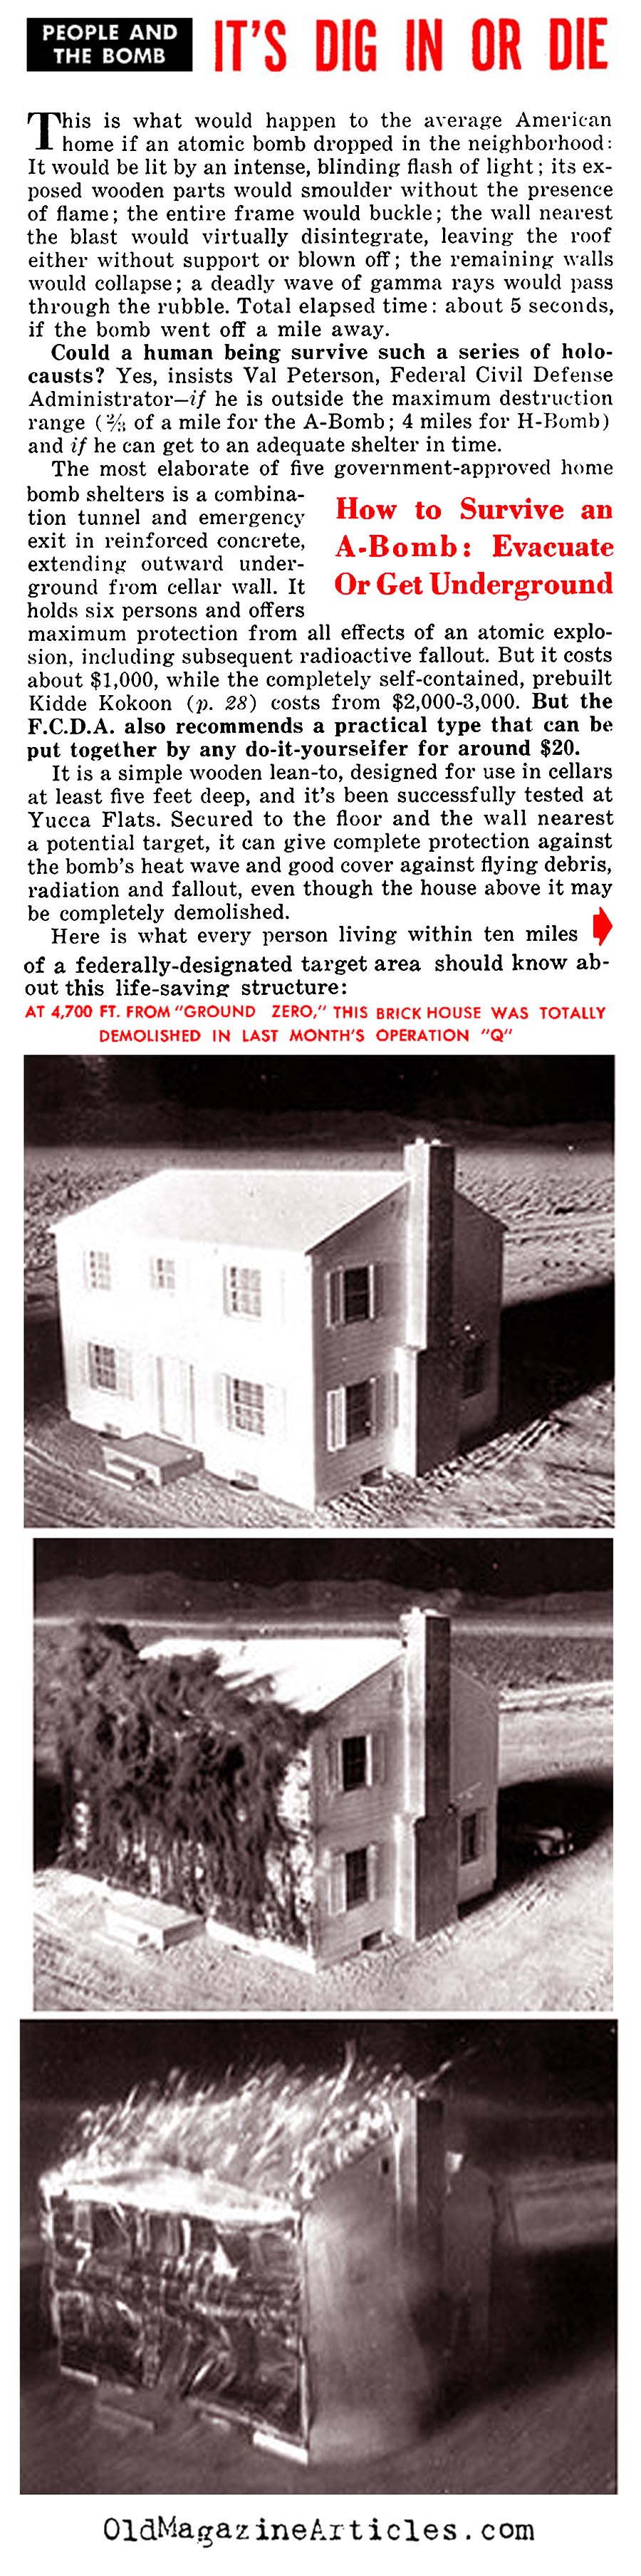 The Allure of the Private Bomb Shelter (People Today Magazine, 1955)